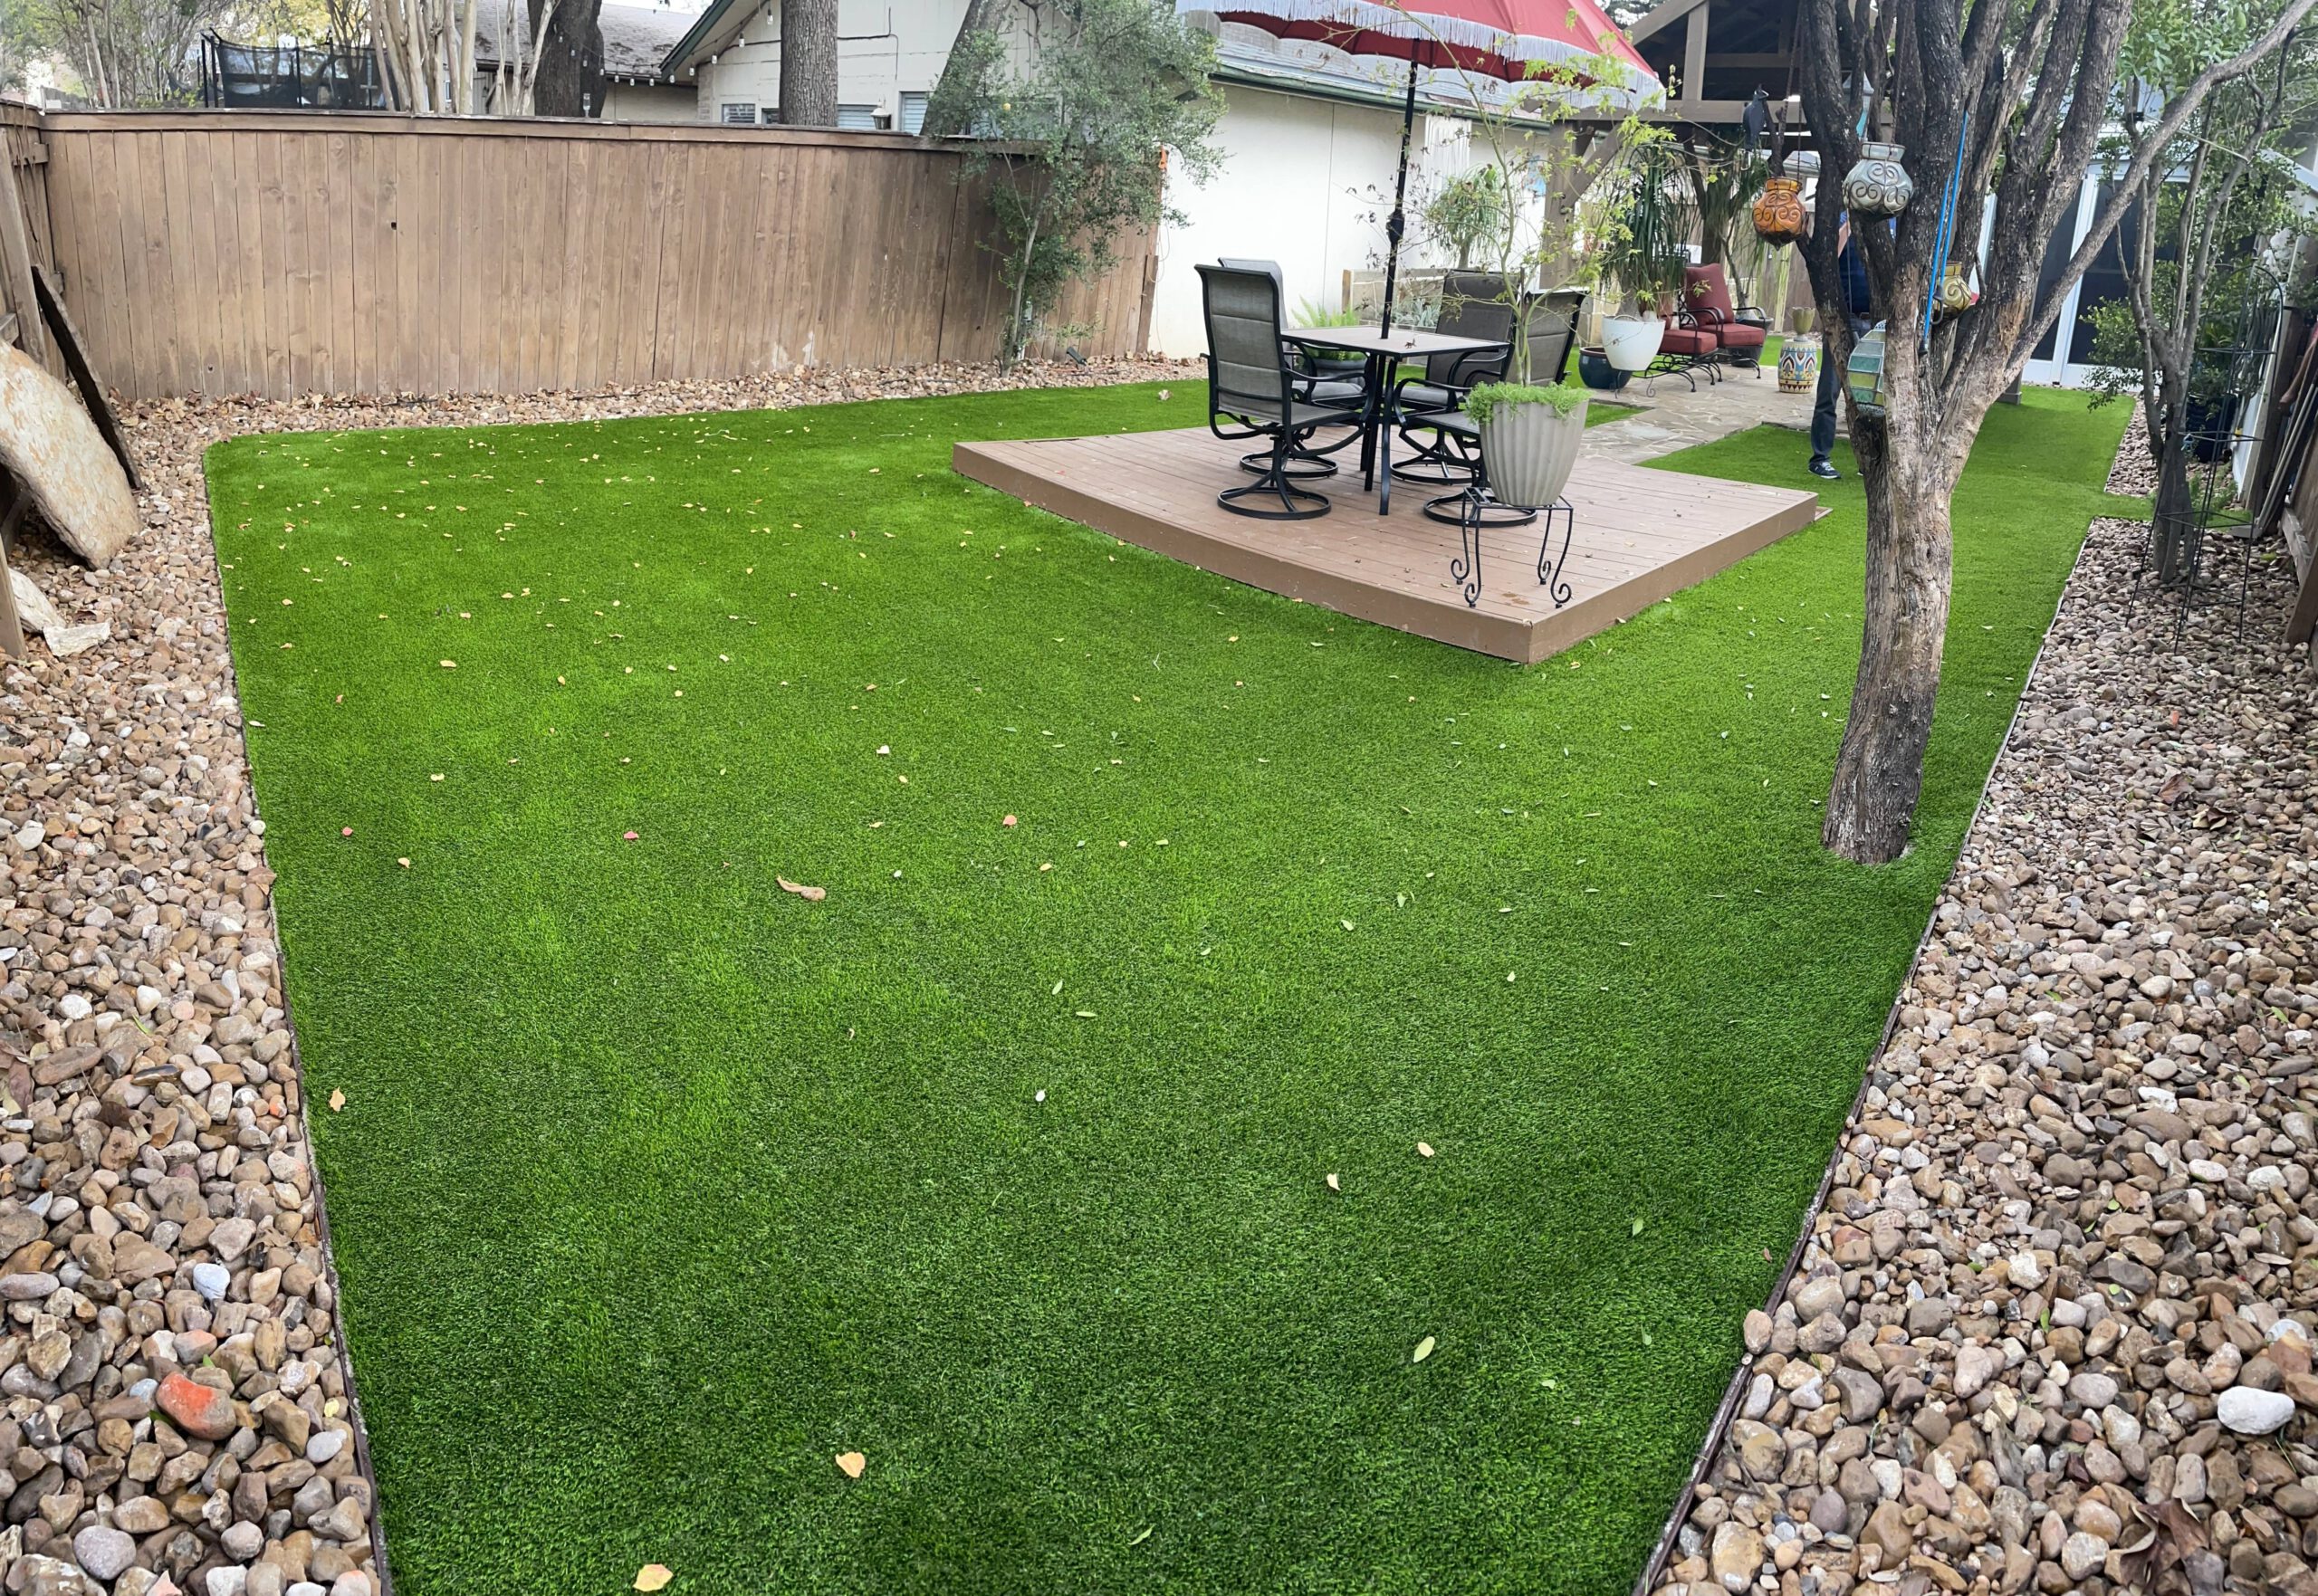 How to Choose the Right Synthetic Turf for Your Home